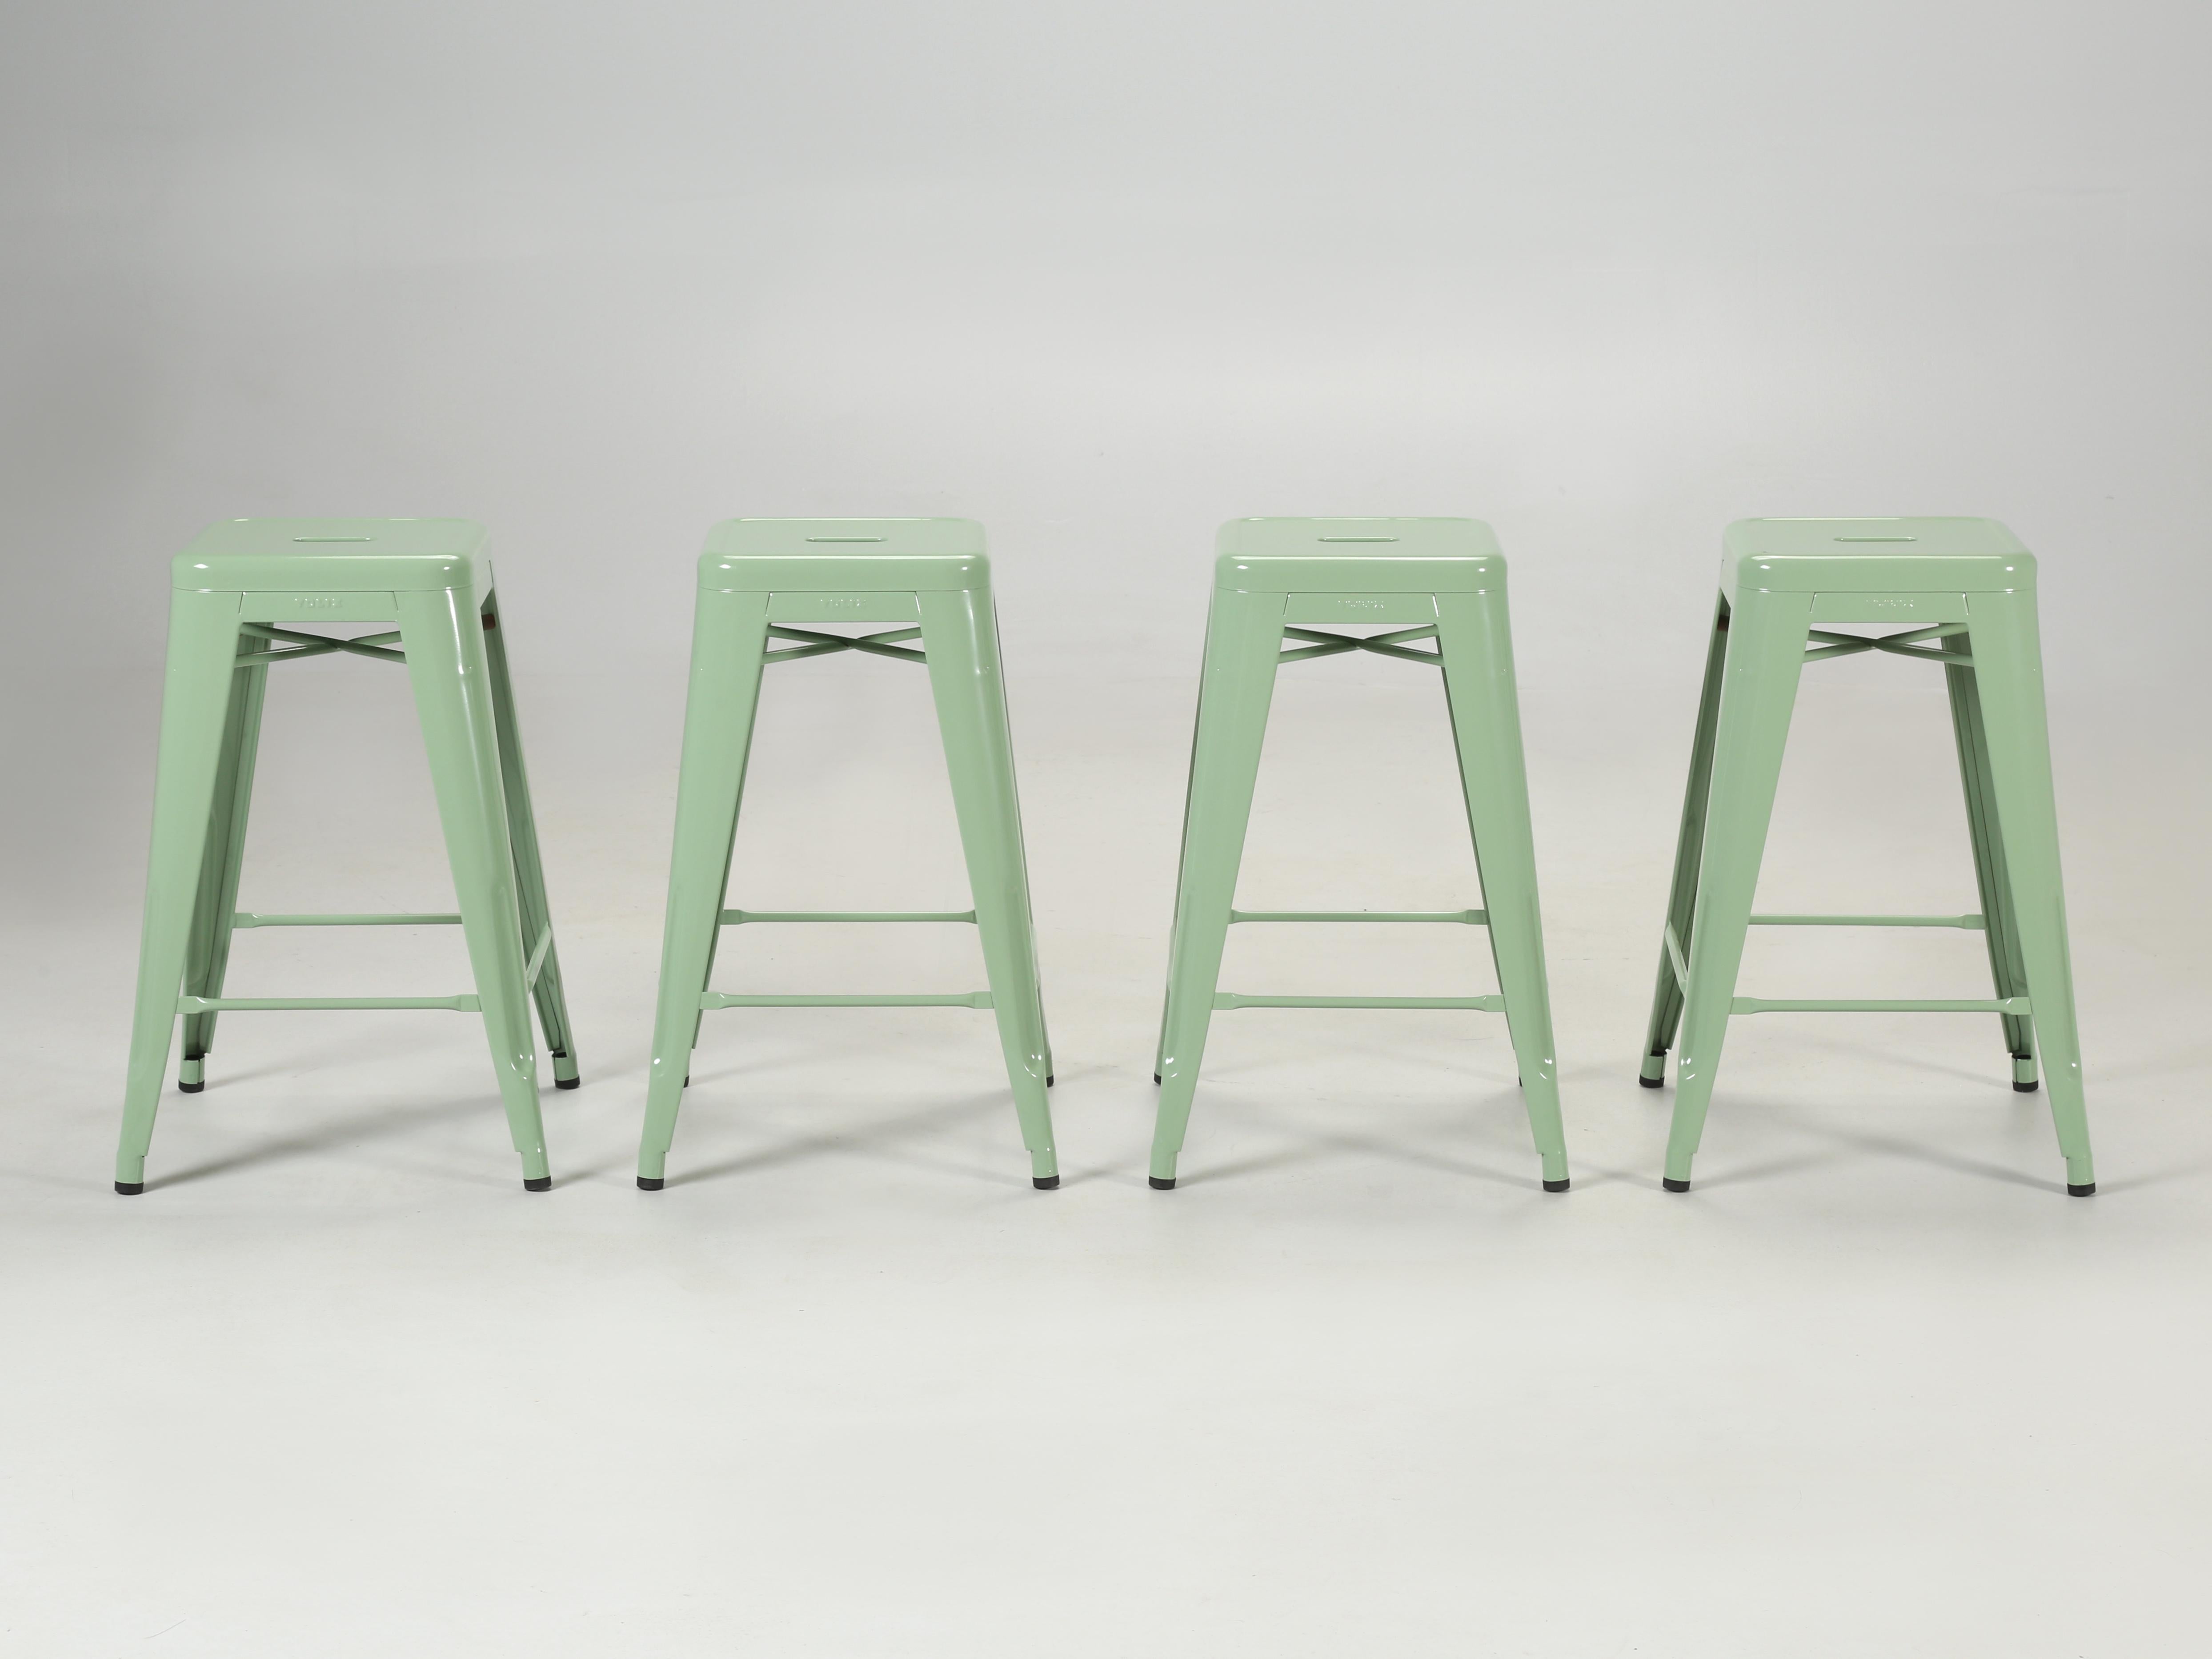 The French firm, Tolix was the originator of the steel stacking chair in the 1920’s, from Xavier Pauchard’ s original design. Later, Tolix would expand into the steel stacking stools you see in our listing on 1stdibs. We stock the steel Tolix